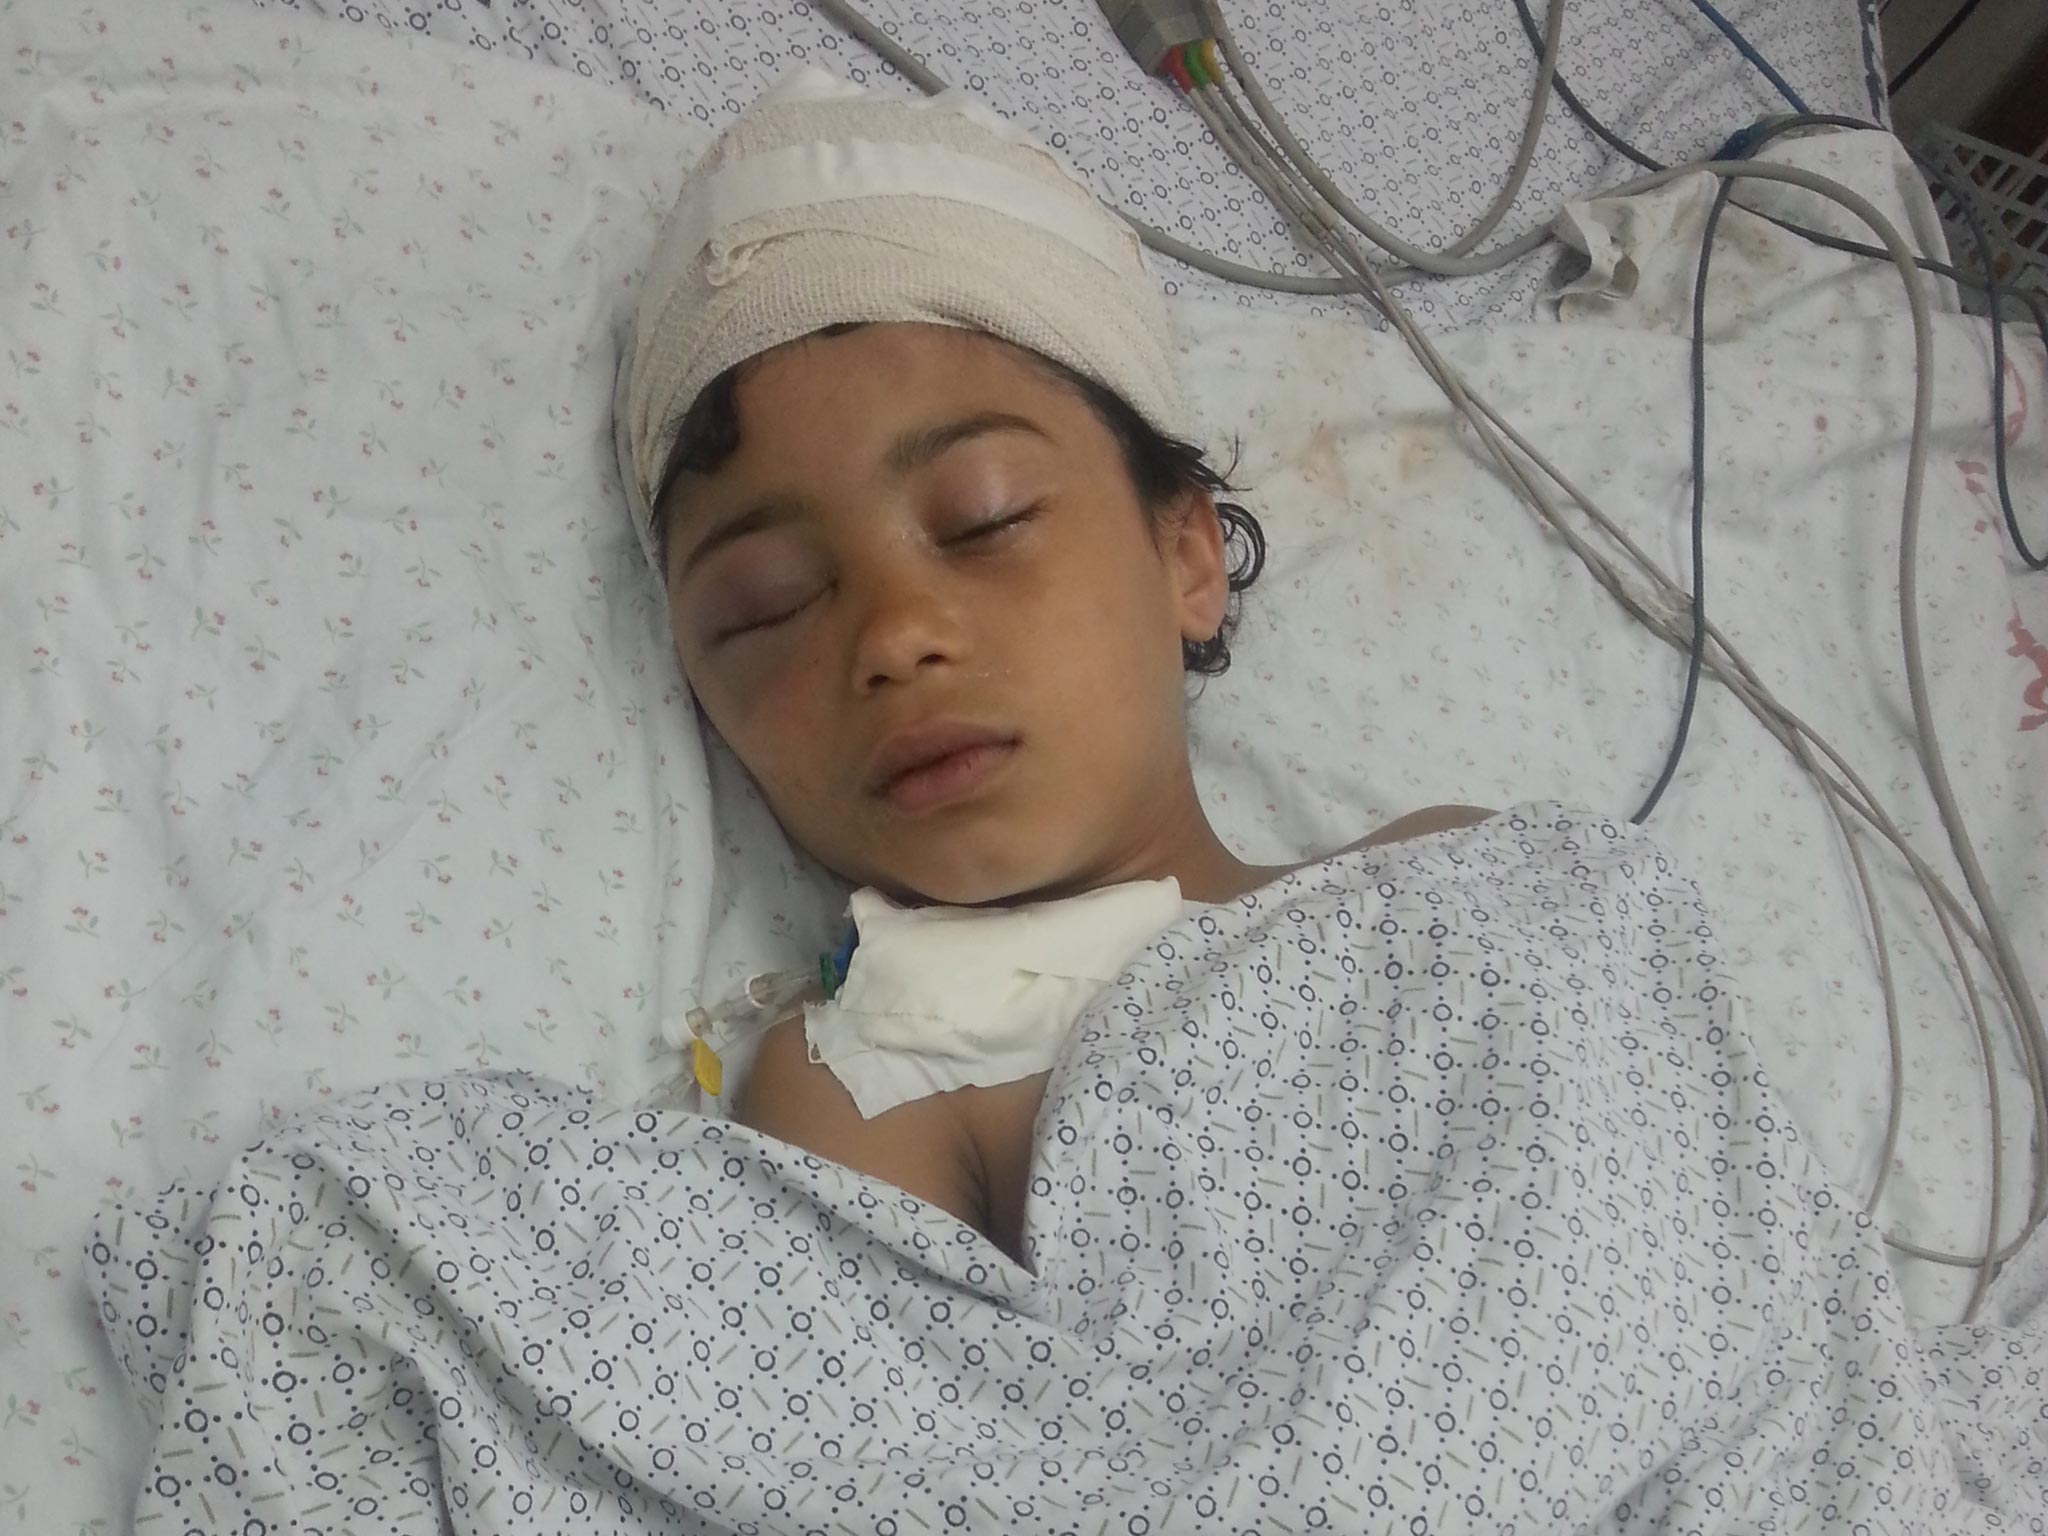 Mariam Al-Masery lies in intensive care at al-Shifa hospital after an Israeli air strike on Gaza City